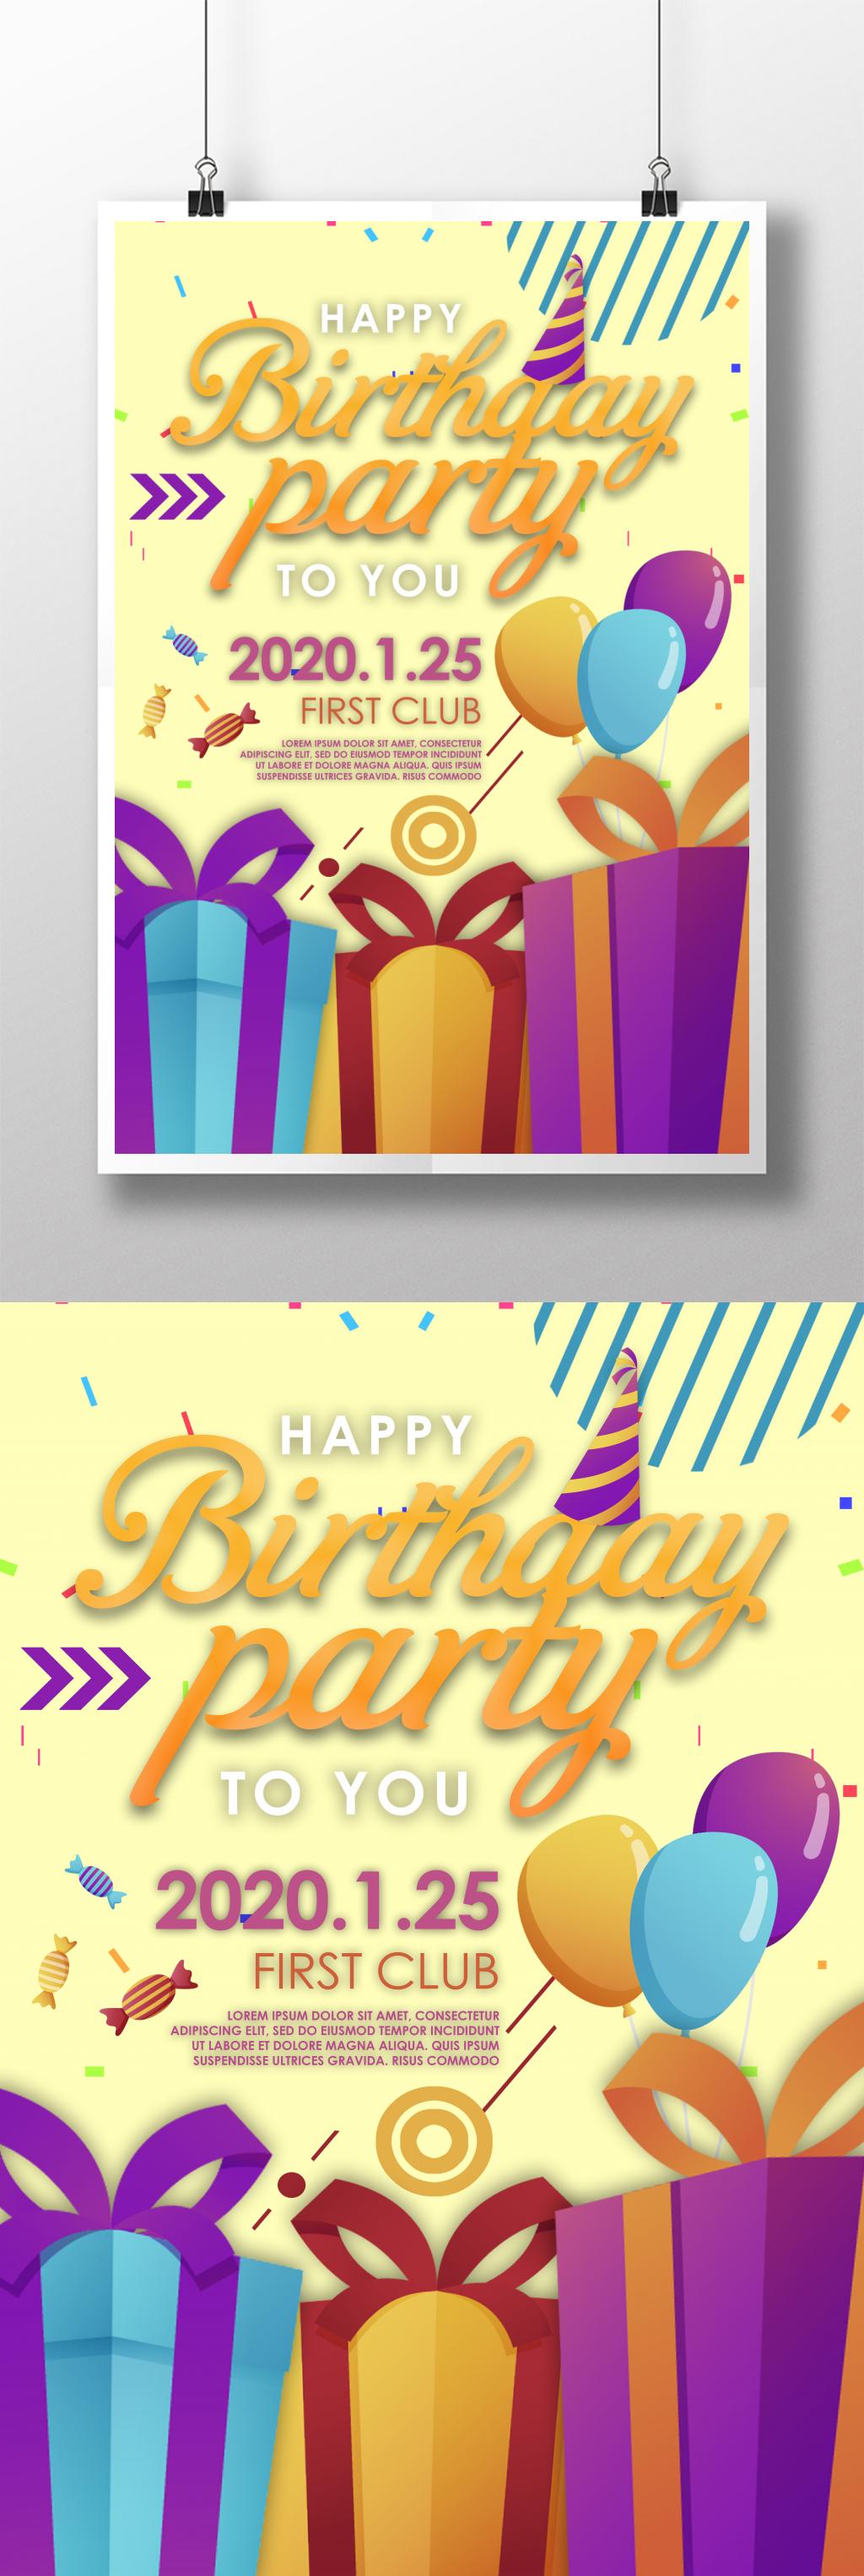 birthday-party-poster-template-image-picture-free-download-450021688